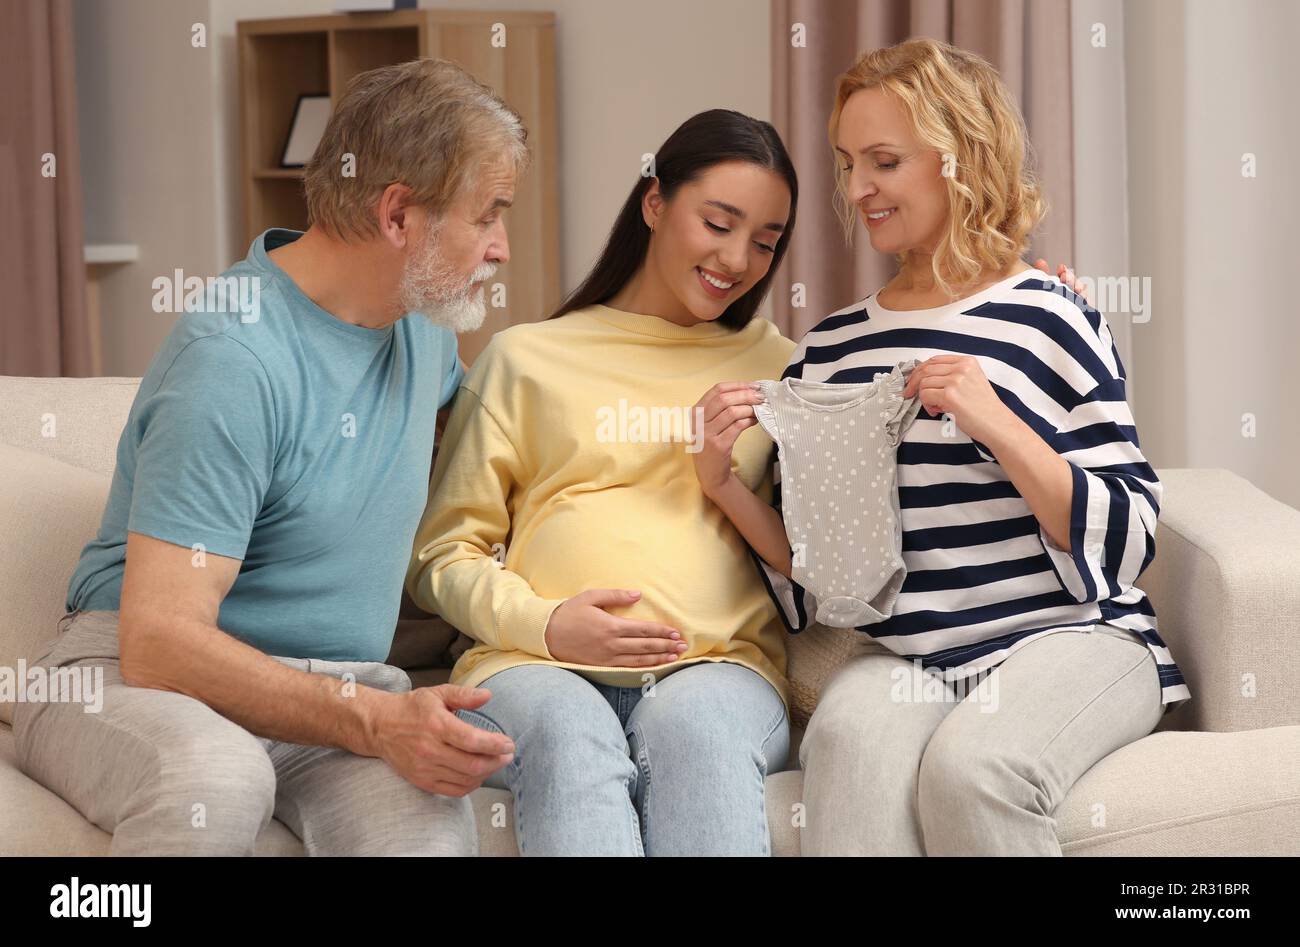 Happy pregnant woman spending time with her parents at home. Grandparents' reaction to future grandson Stock Photo